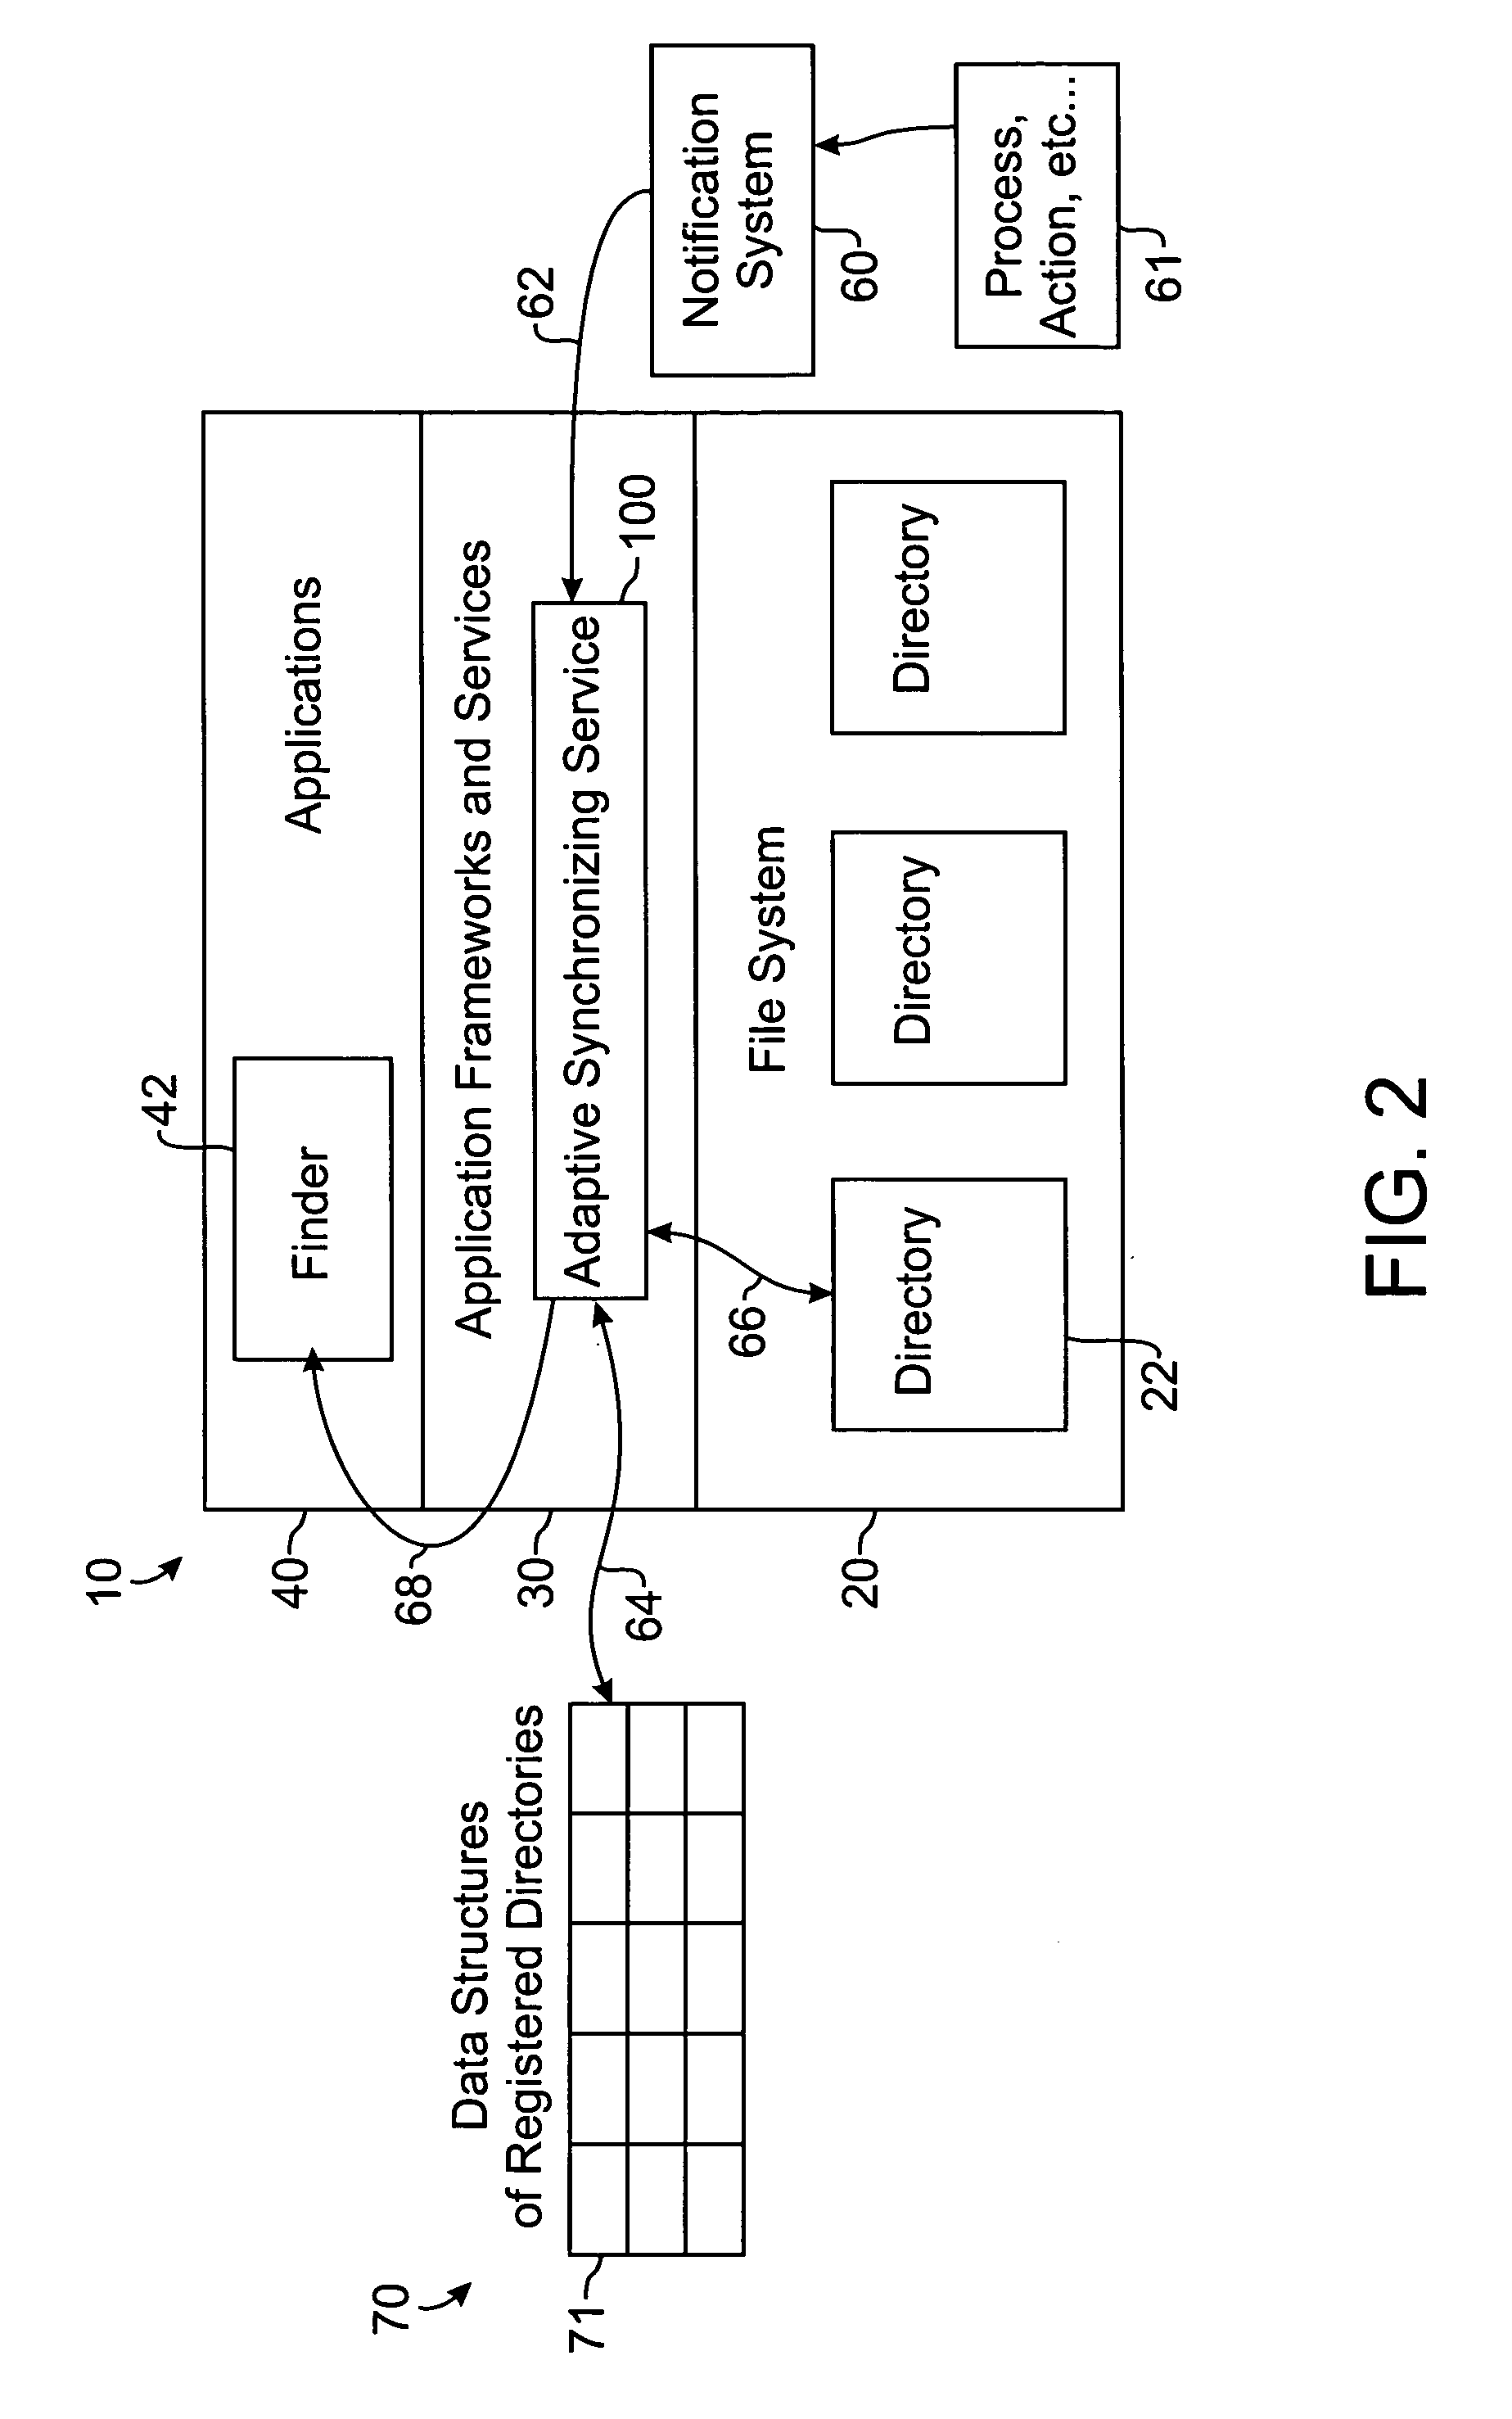 Adaptive service for handling notifications and synchronizing directories of a file system